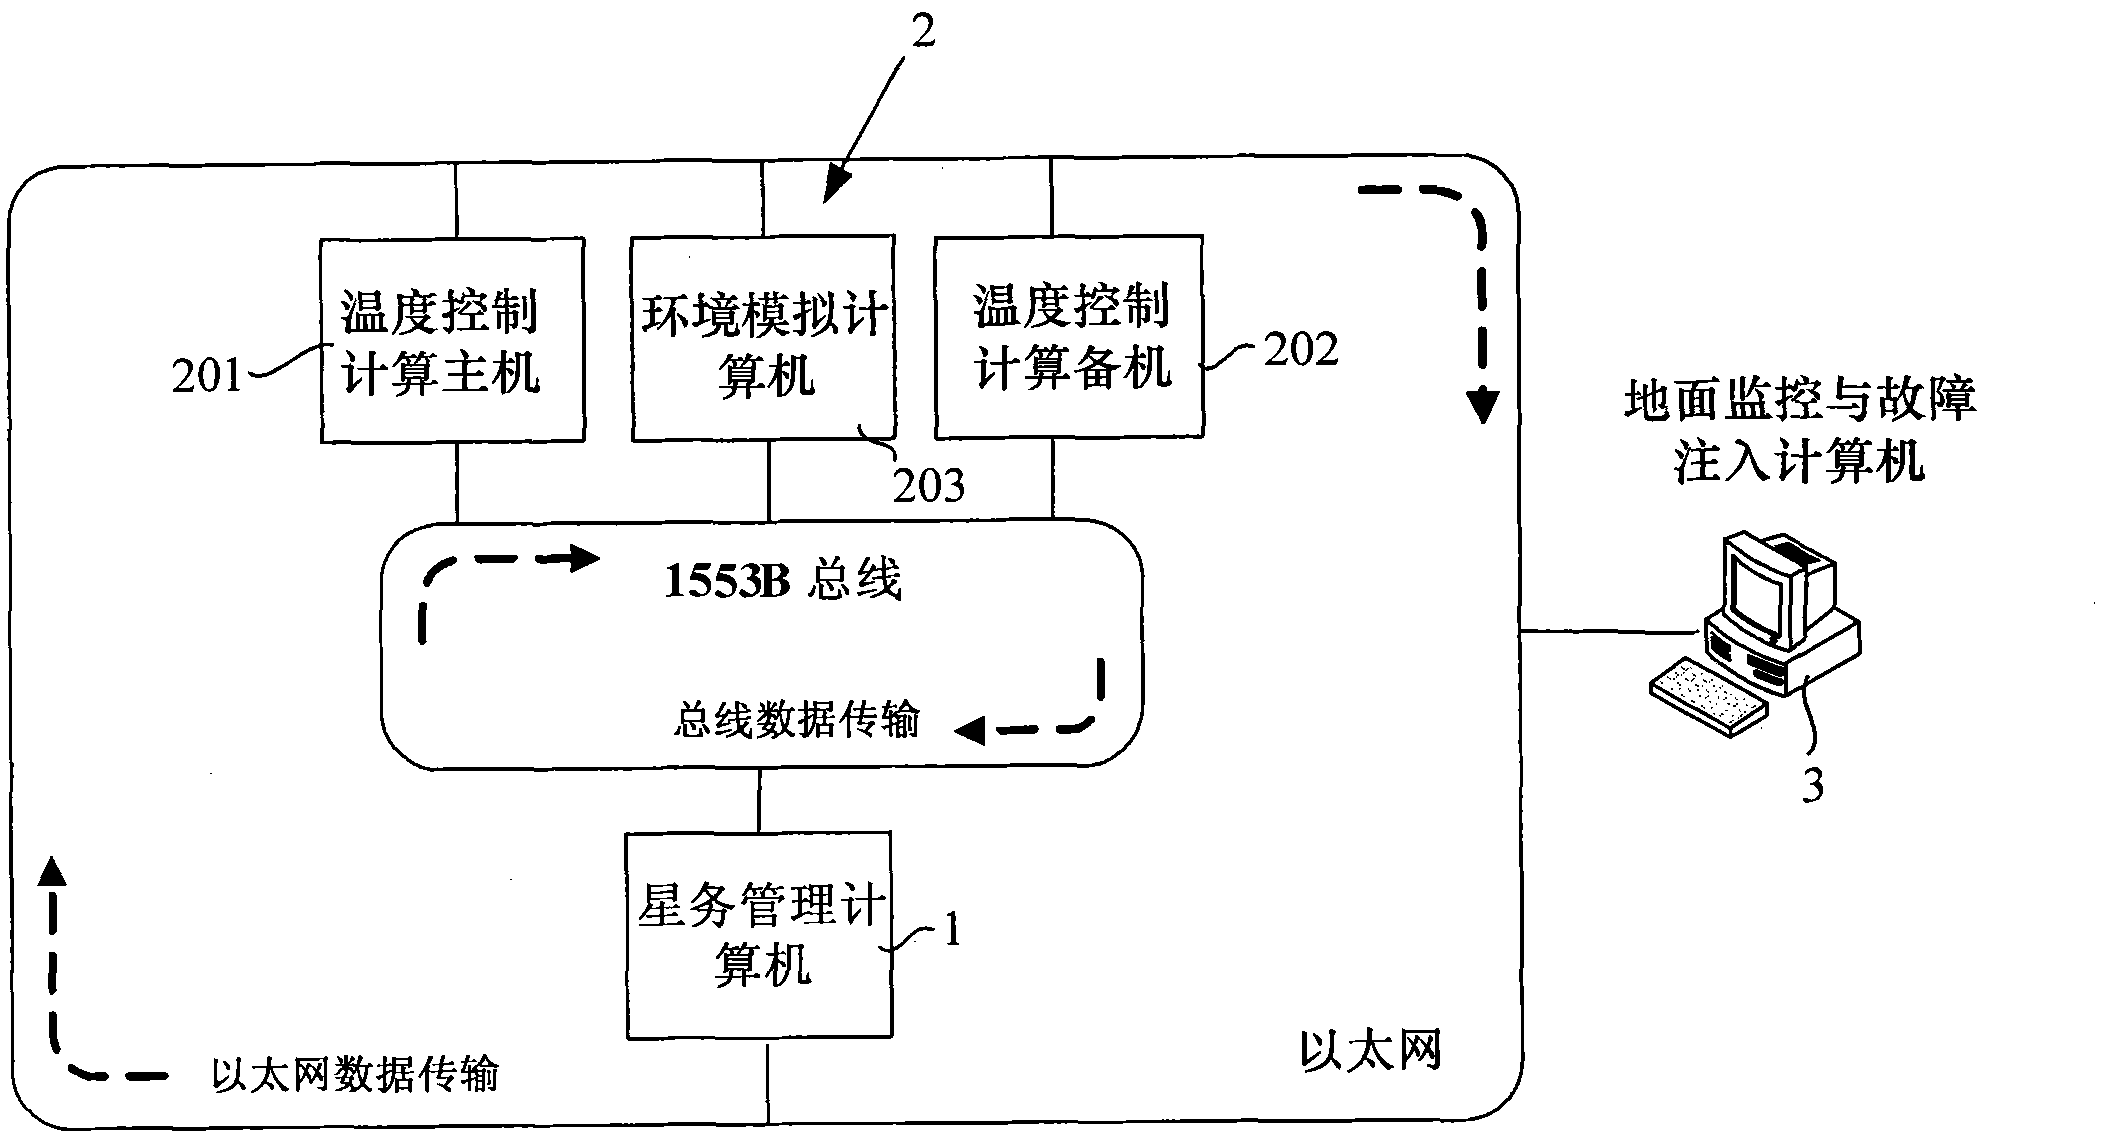 Embedded satellite-borne fault-tolerant temperature control system and verification method thereof